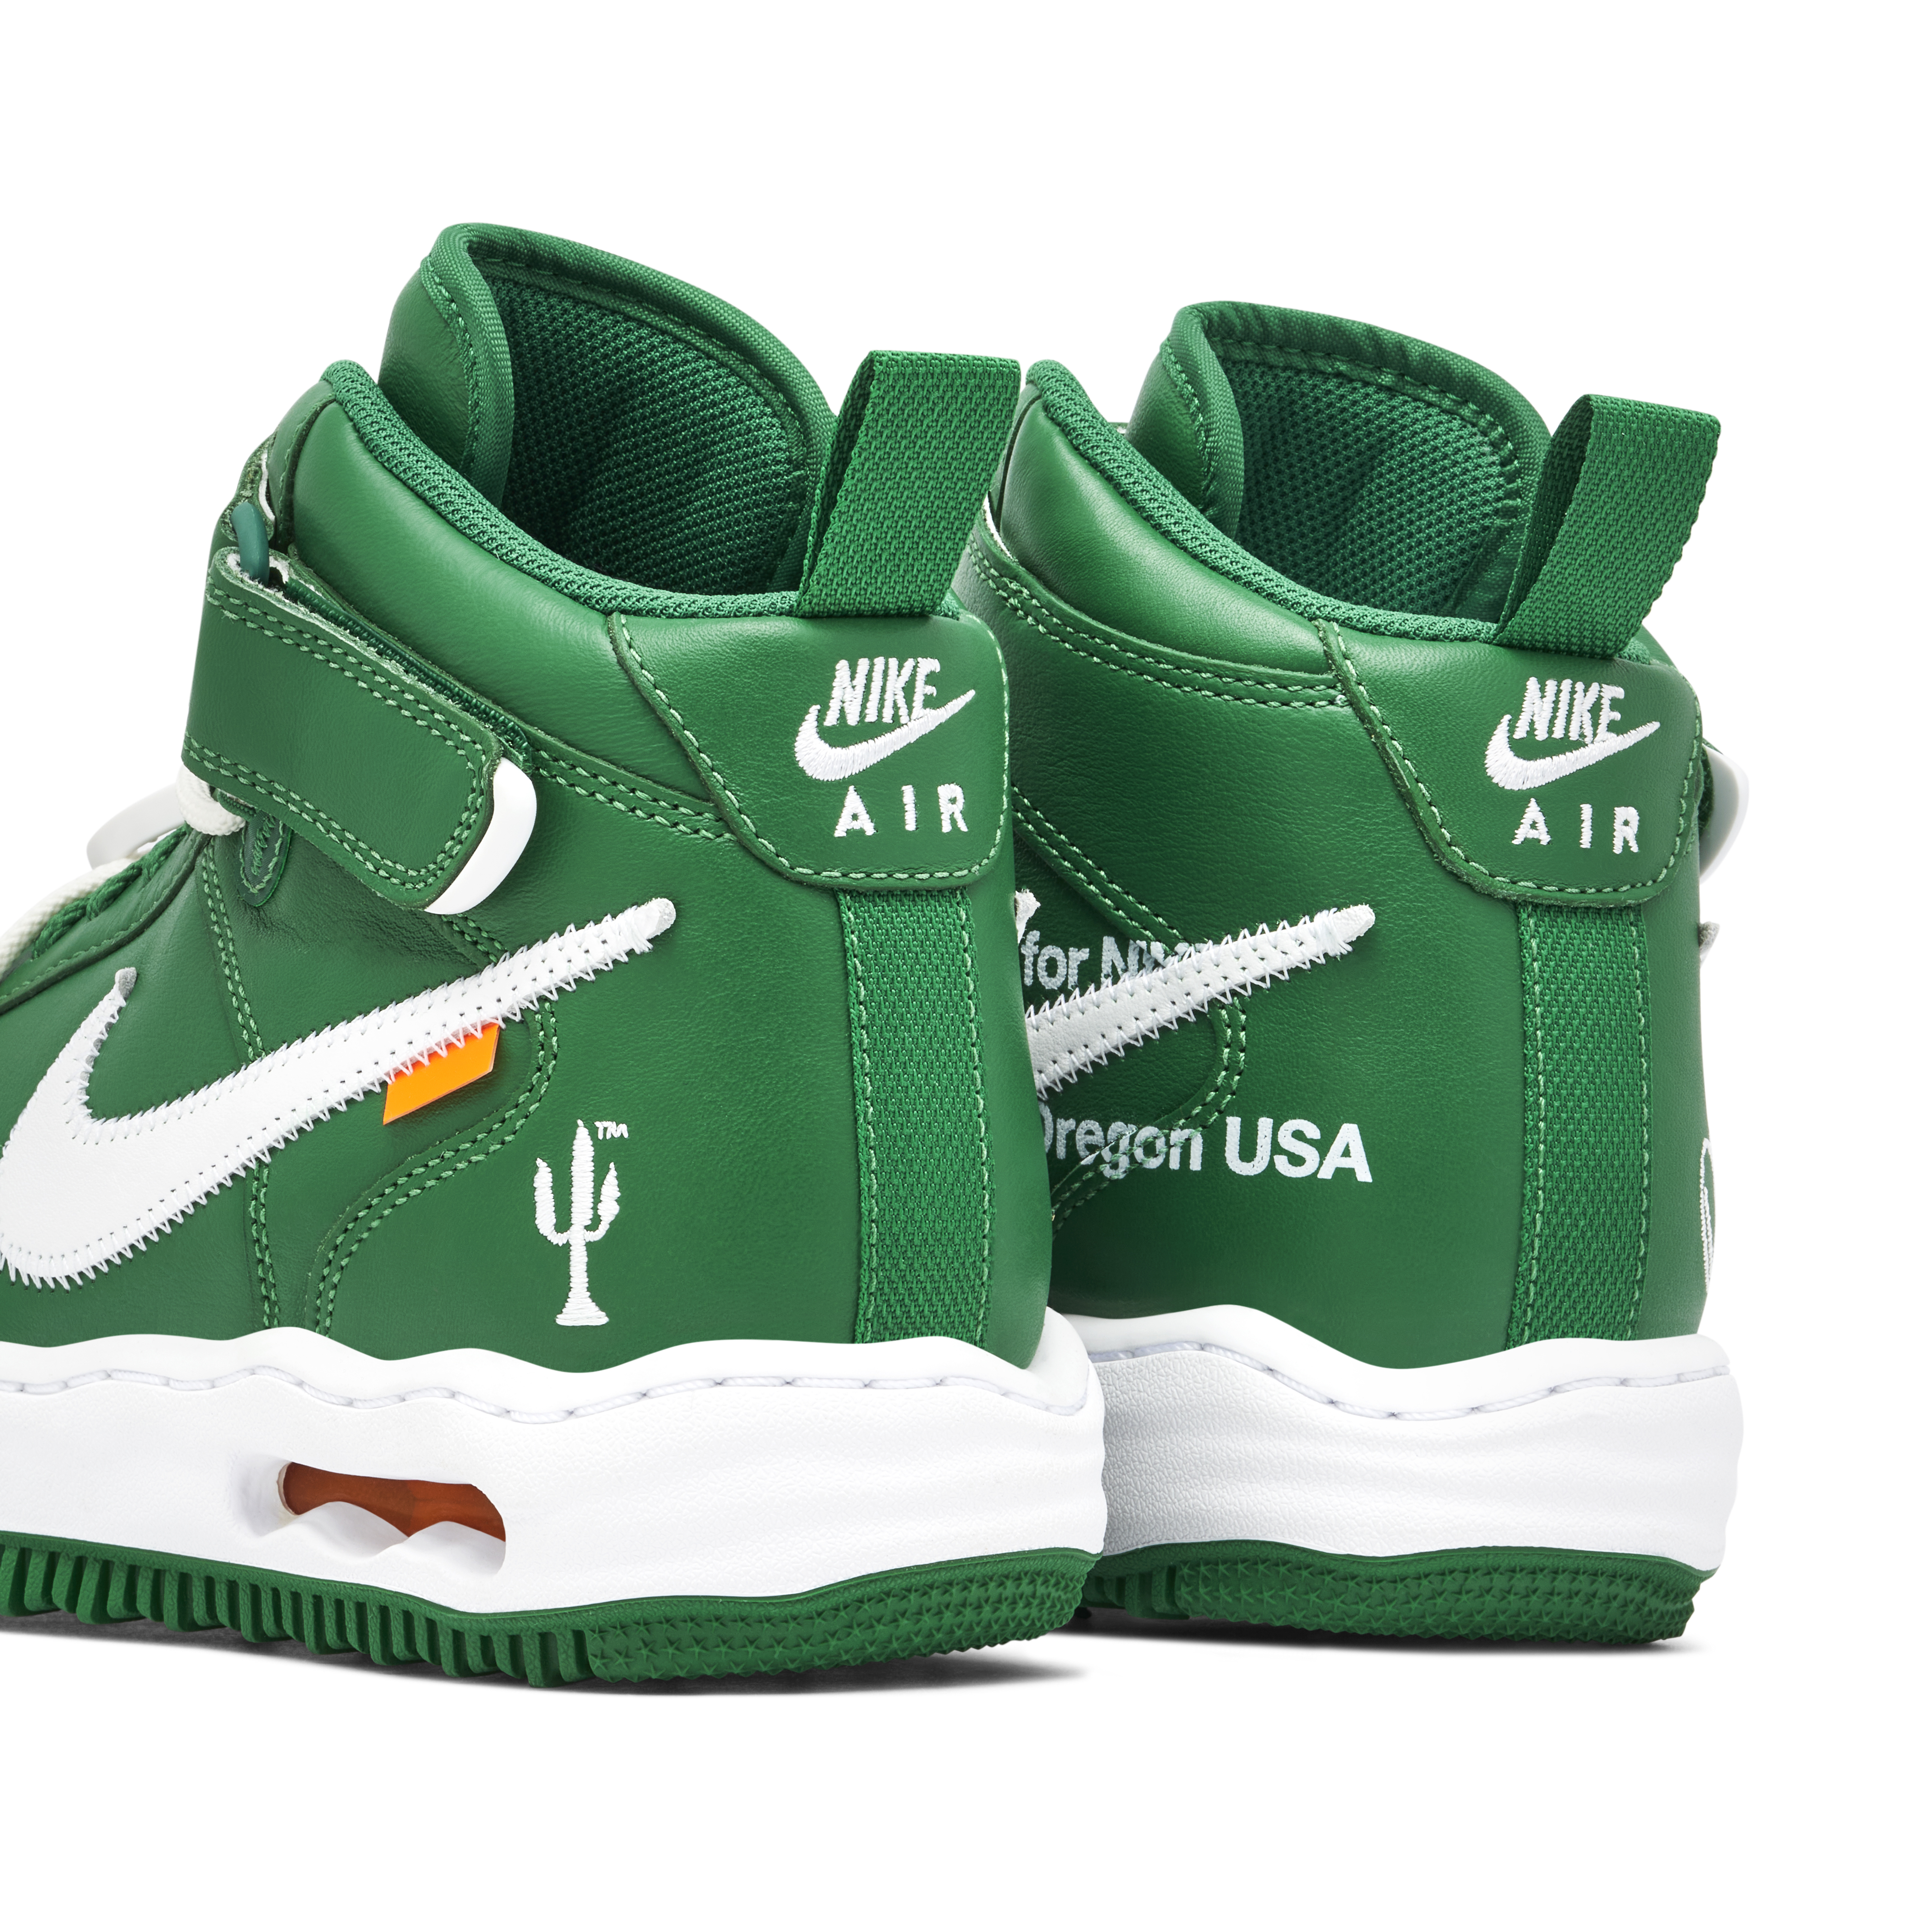 NIKE x Off-White Air Force 1 Mid Sp Pine Green, DR0500-300, pine green/ white-white at solebox